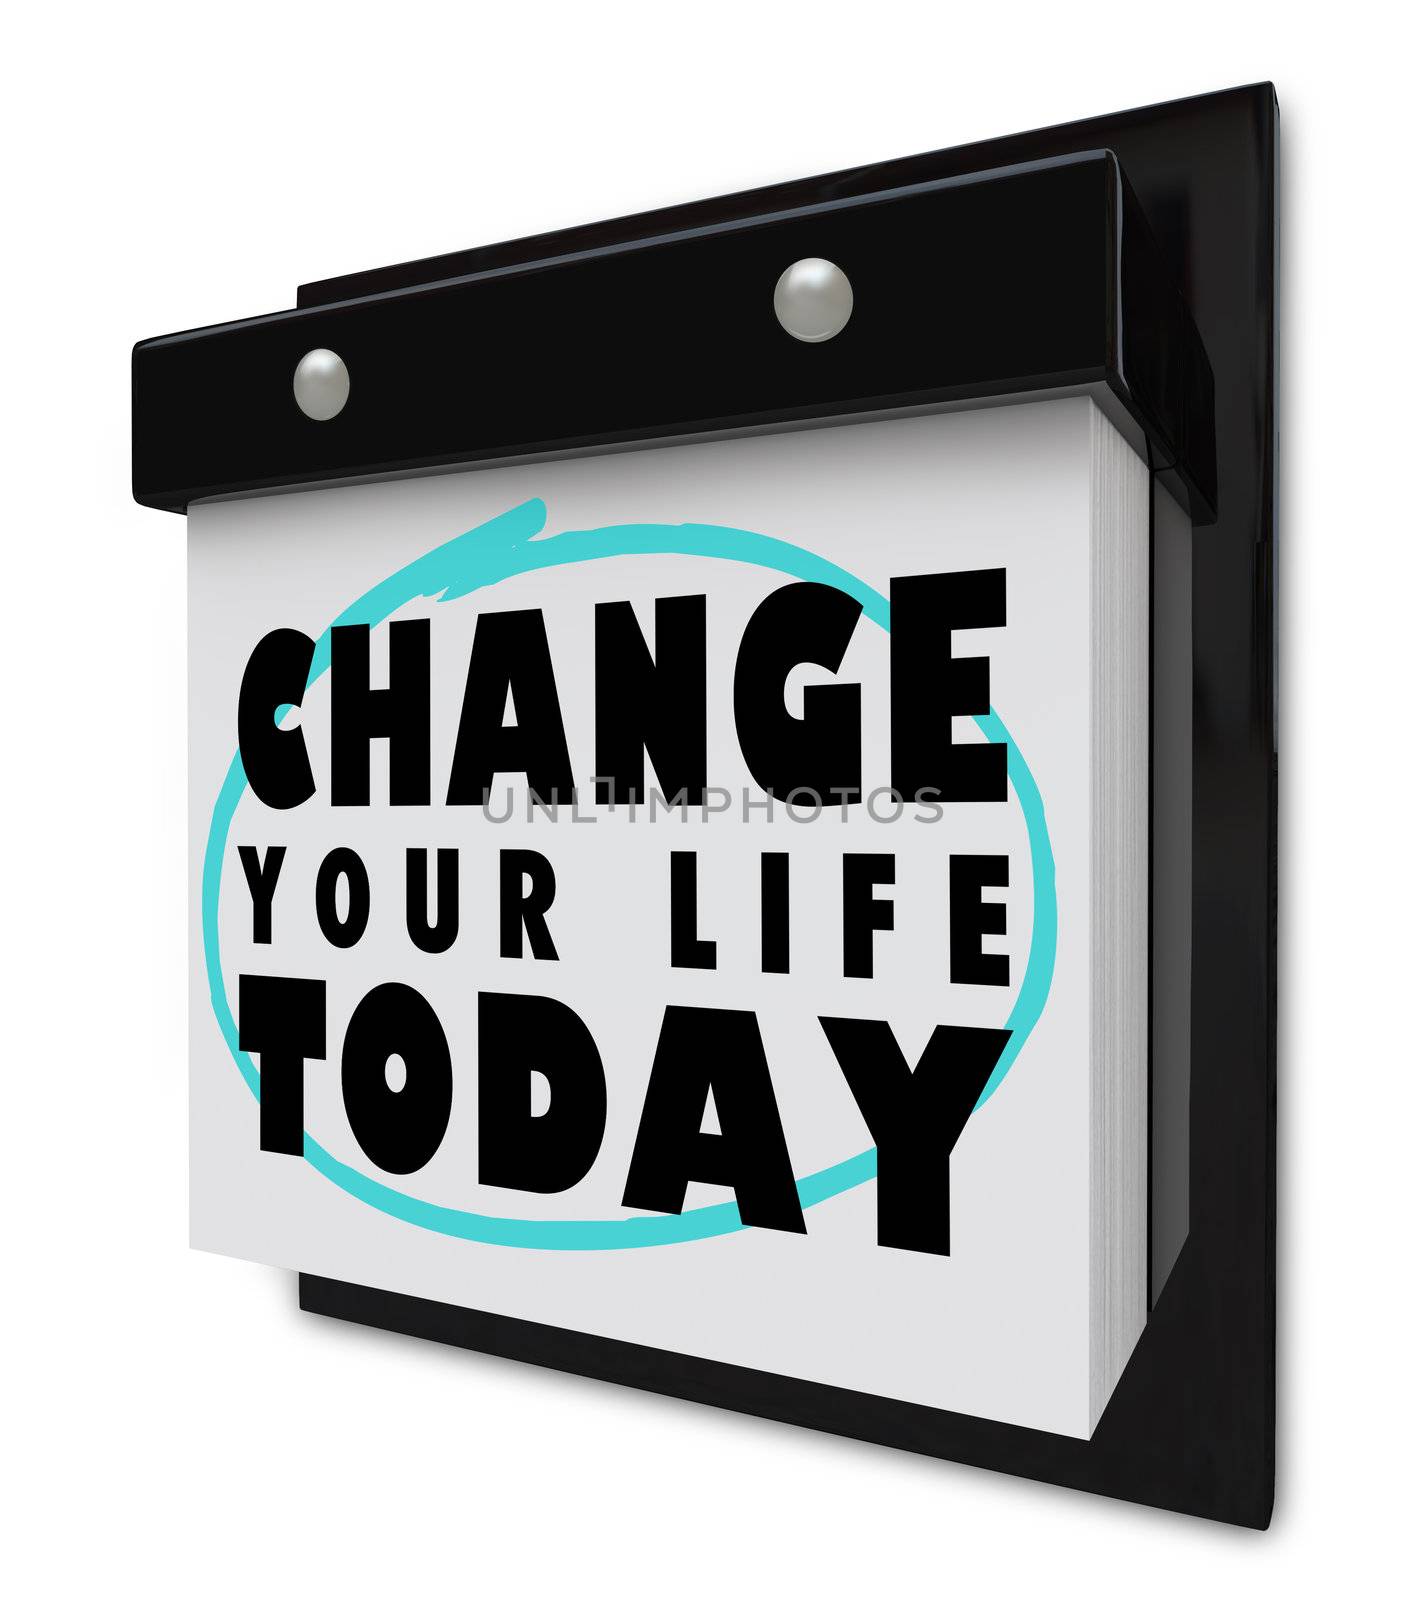 Change Your Life Today - Wall Calendar by iQoncept